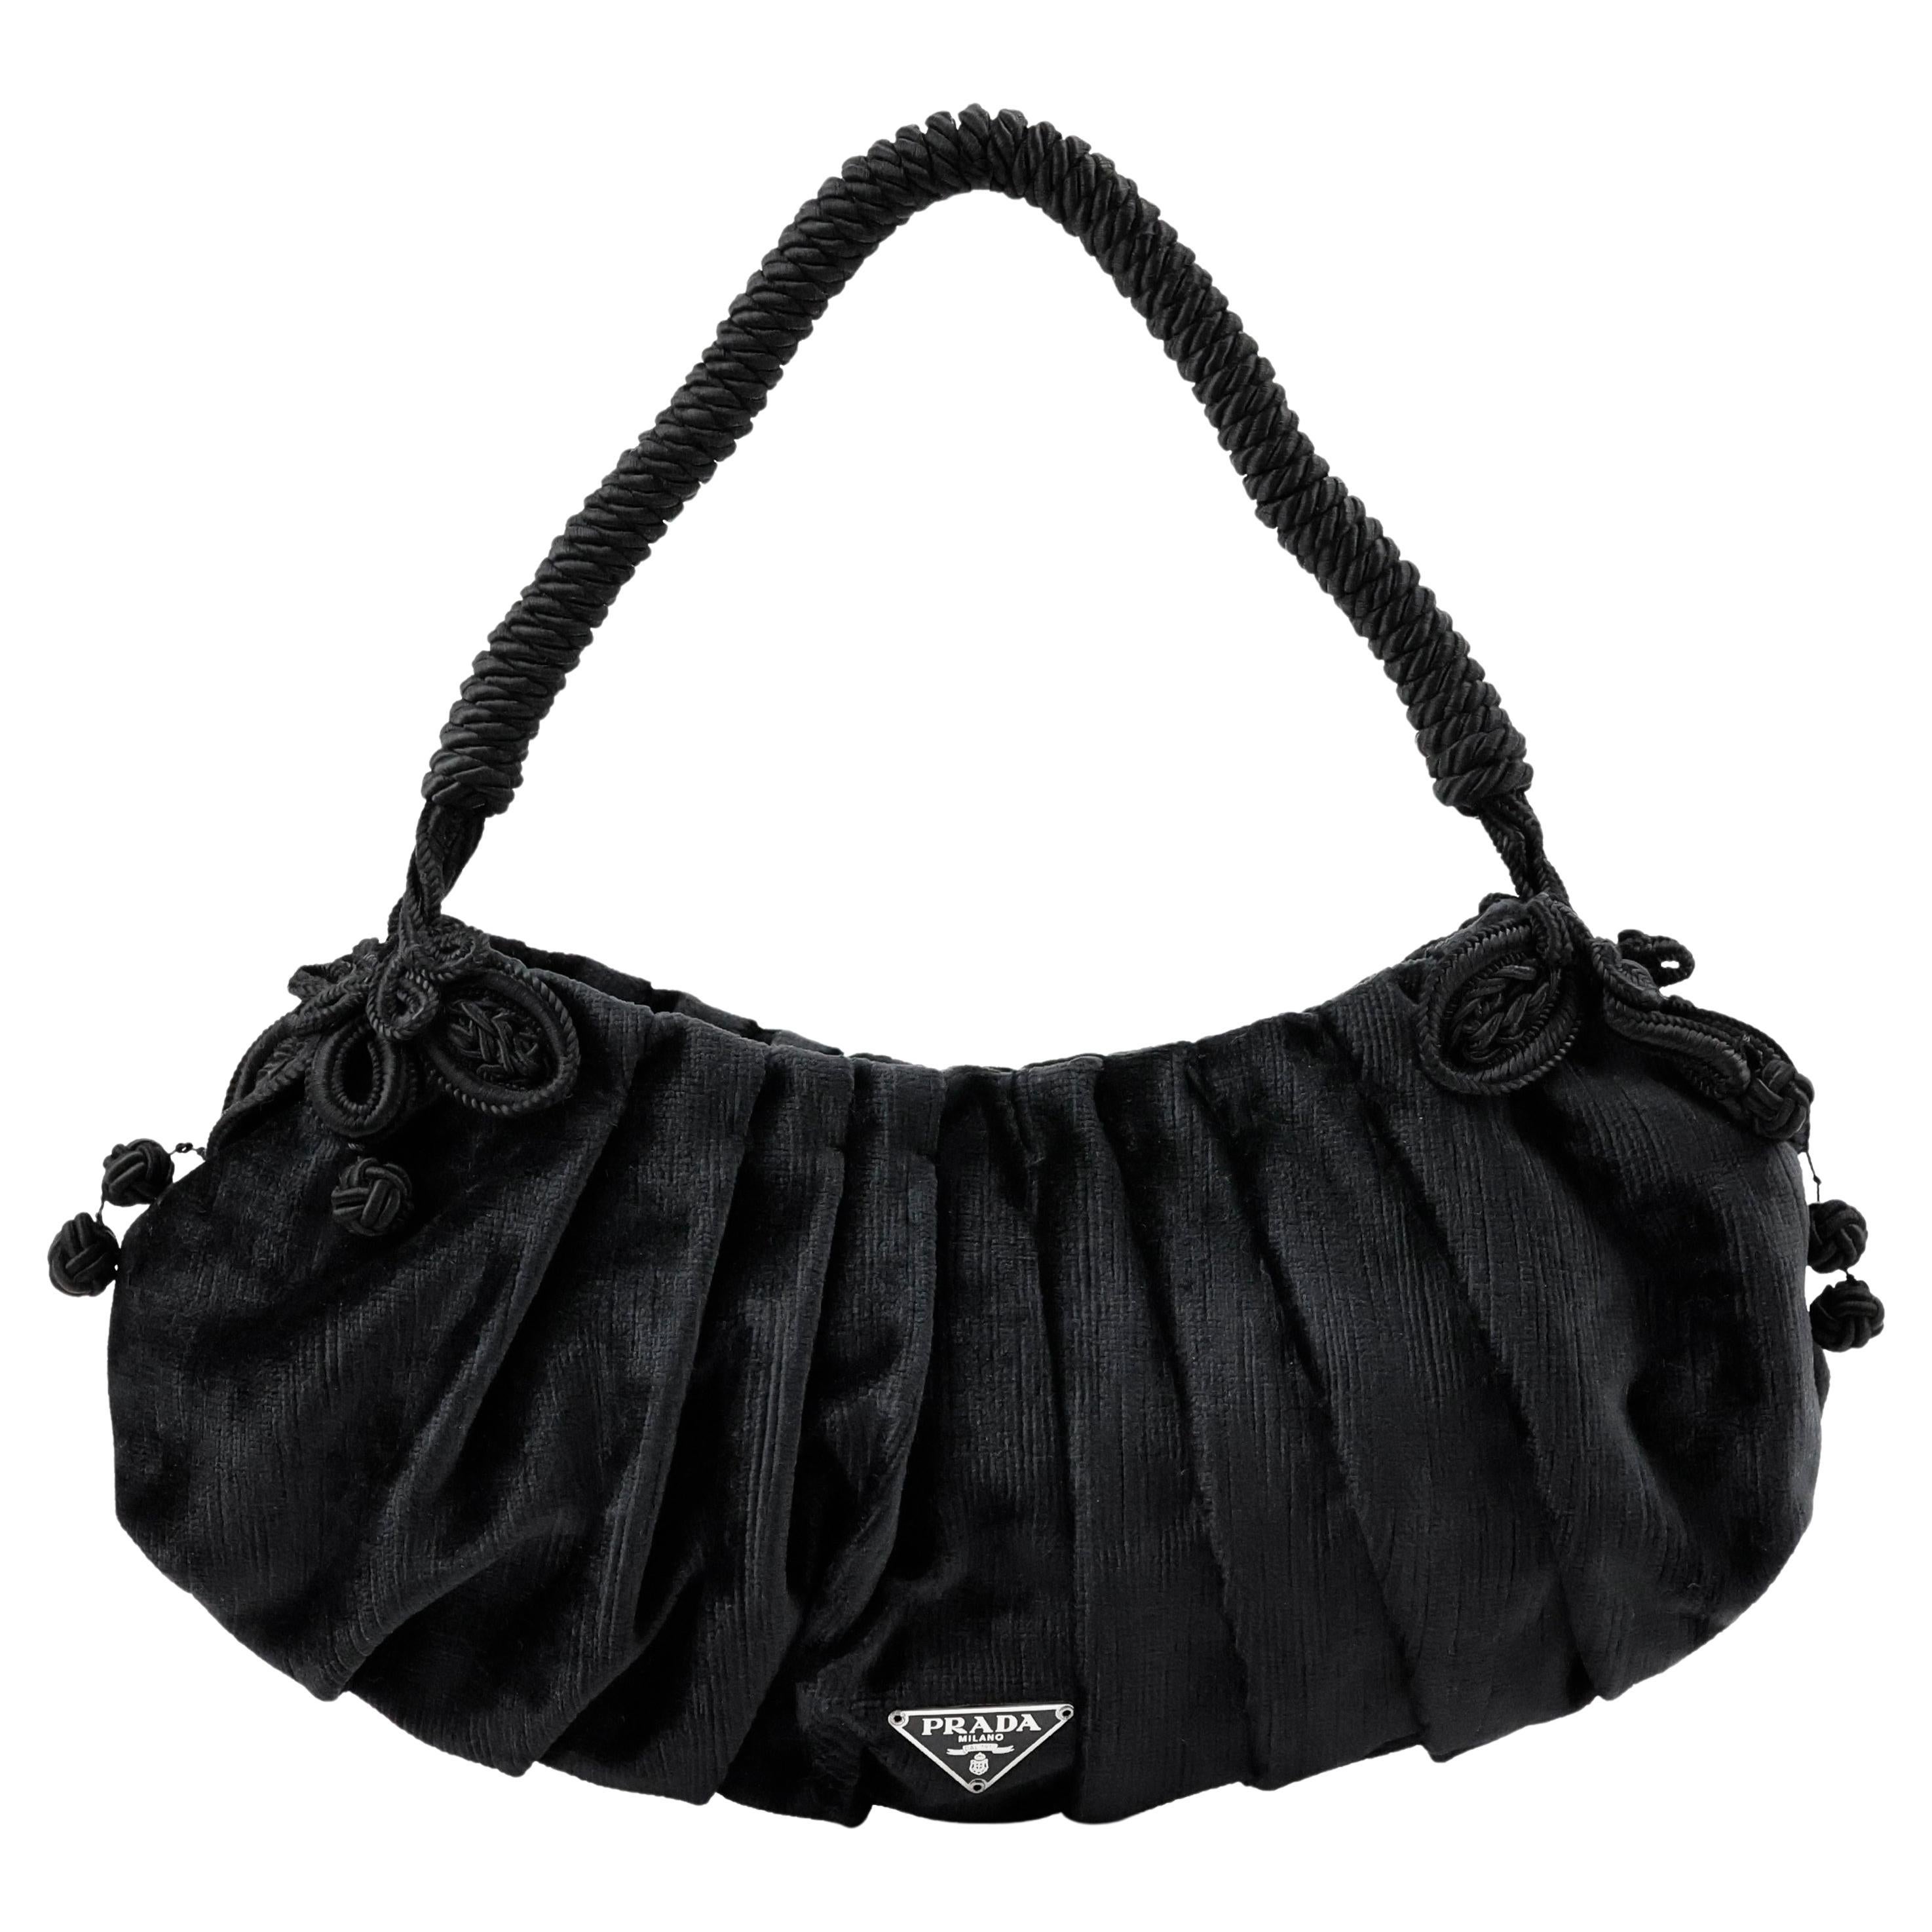 Prada Bag in black embroidered corduroy and silk For Sale